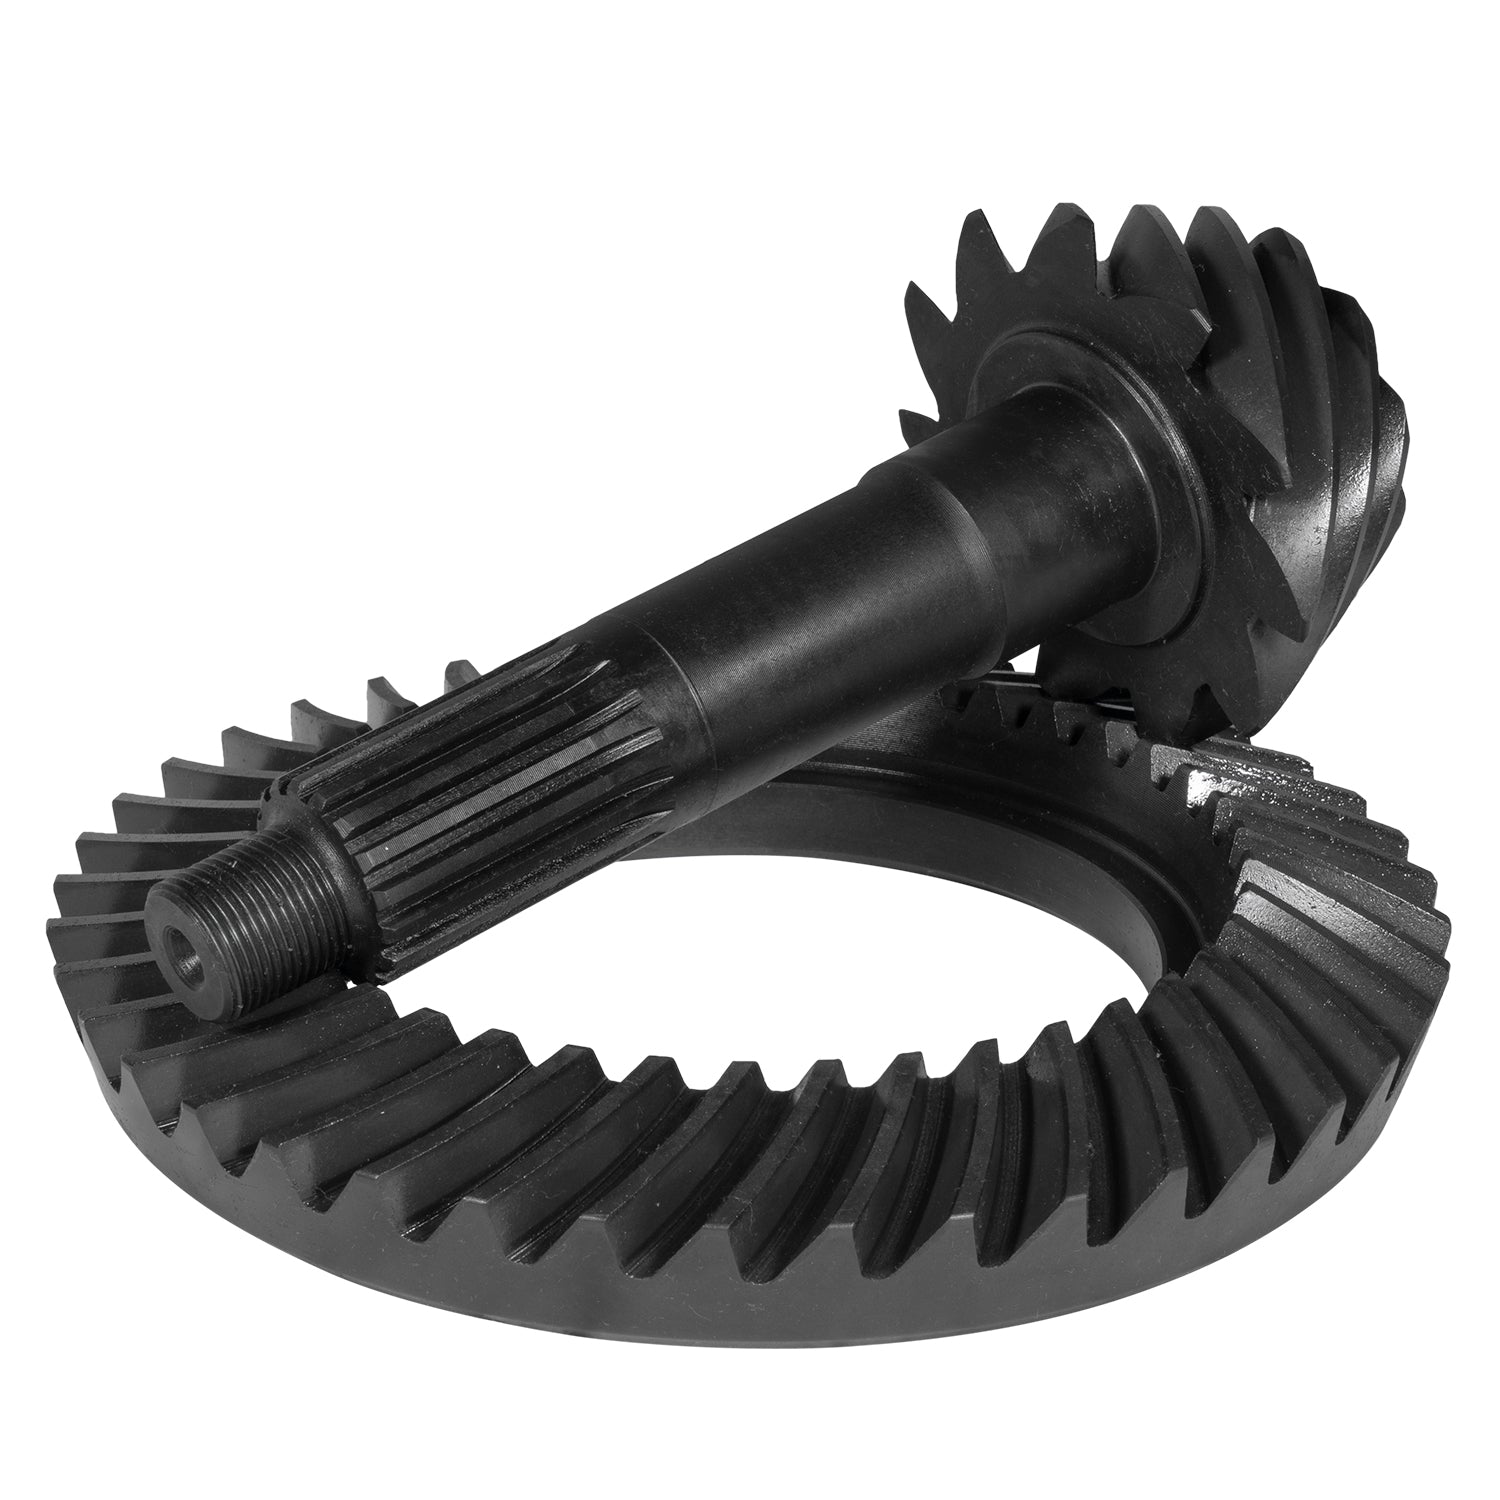 Yukon Gear Chevrolet Differential Ring and Pinion Kit - Rear YGK2363